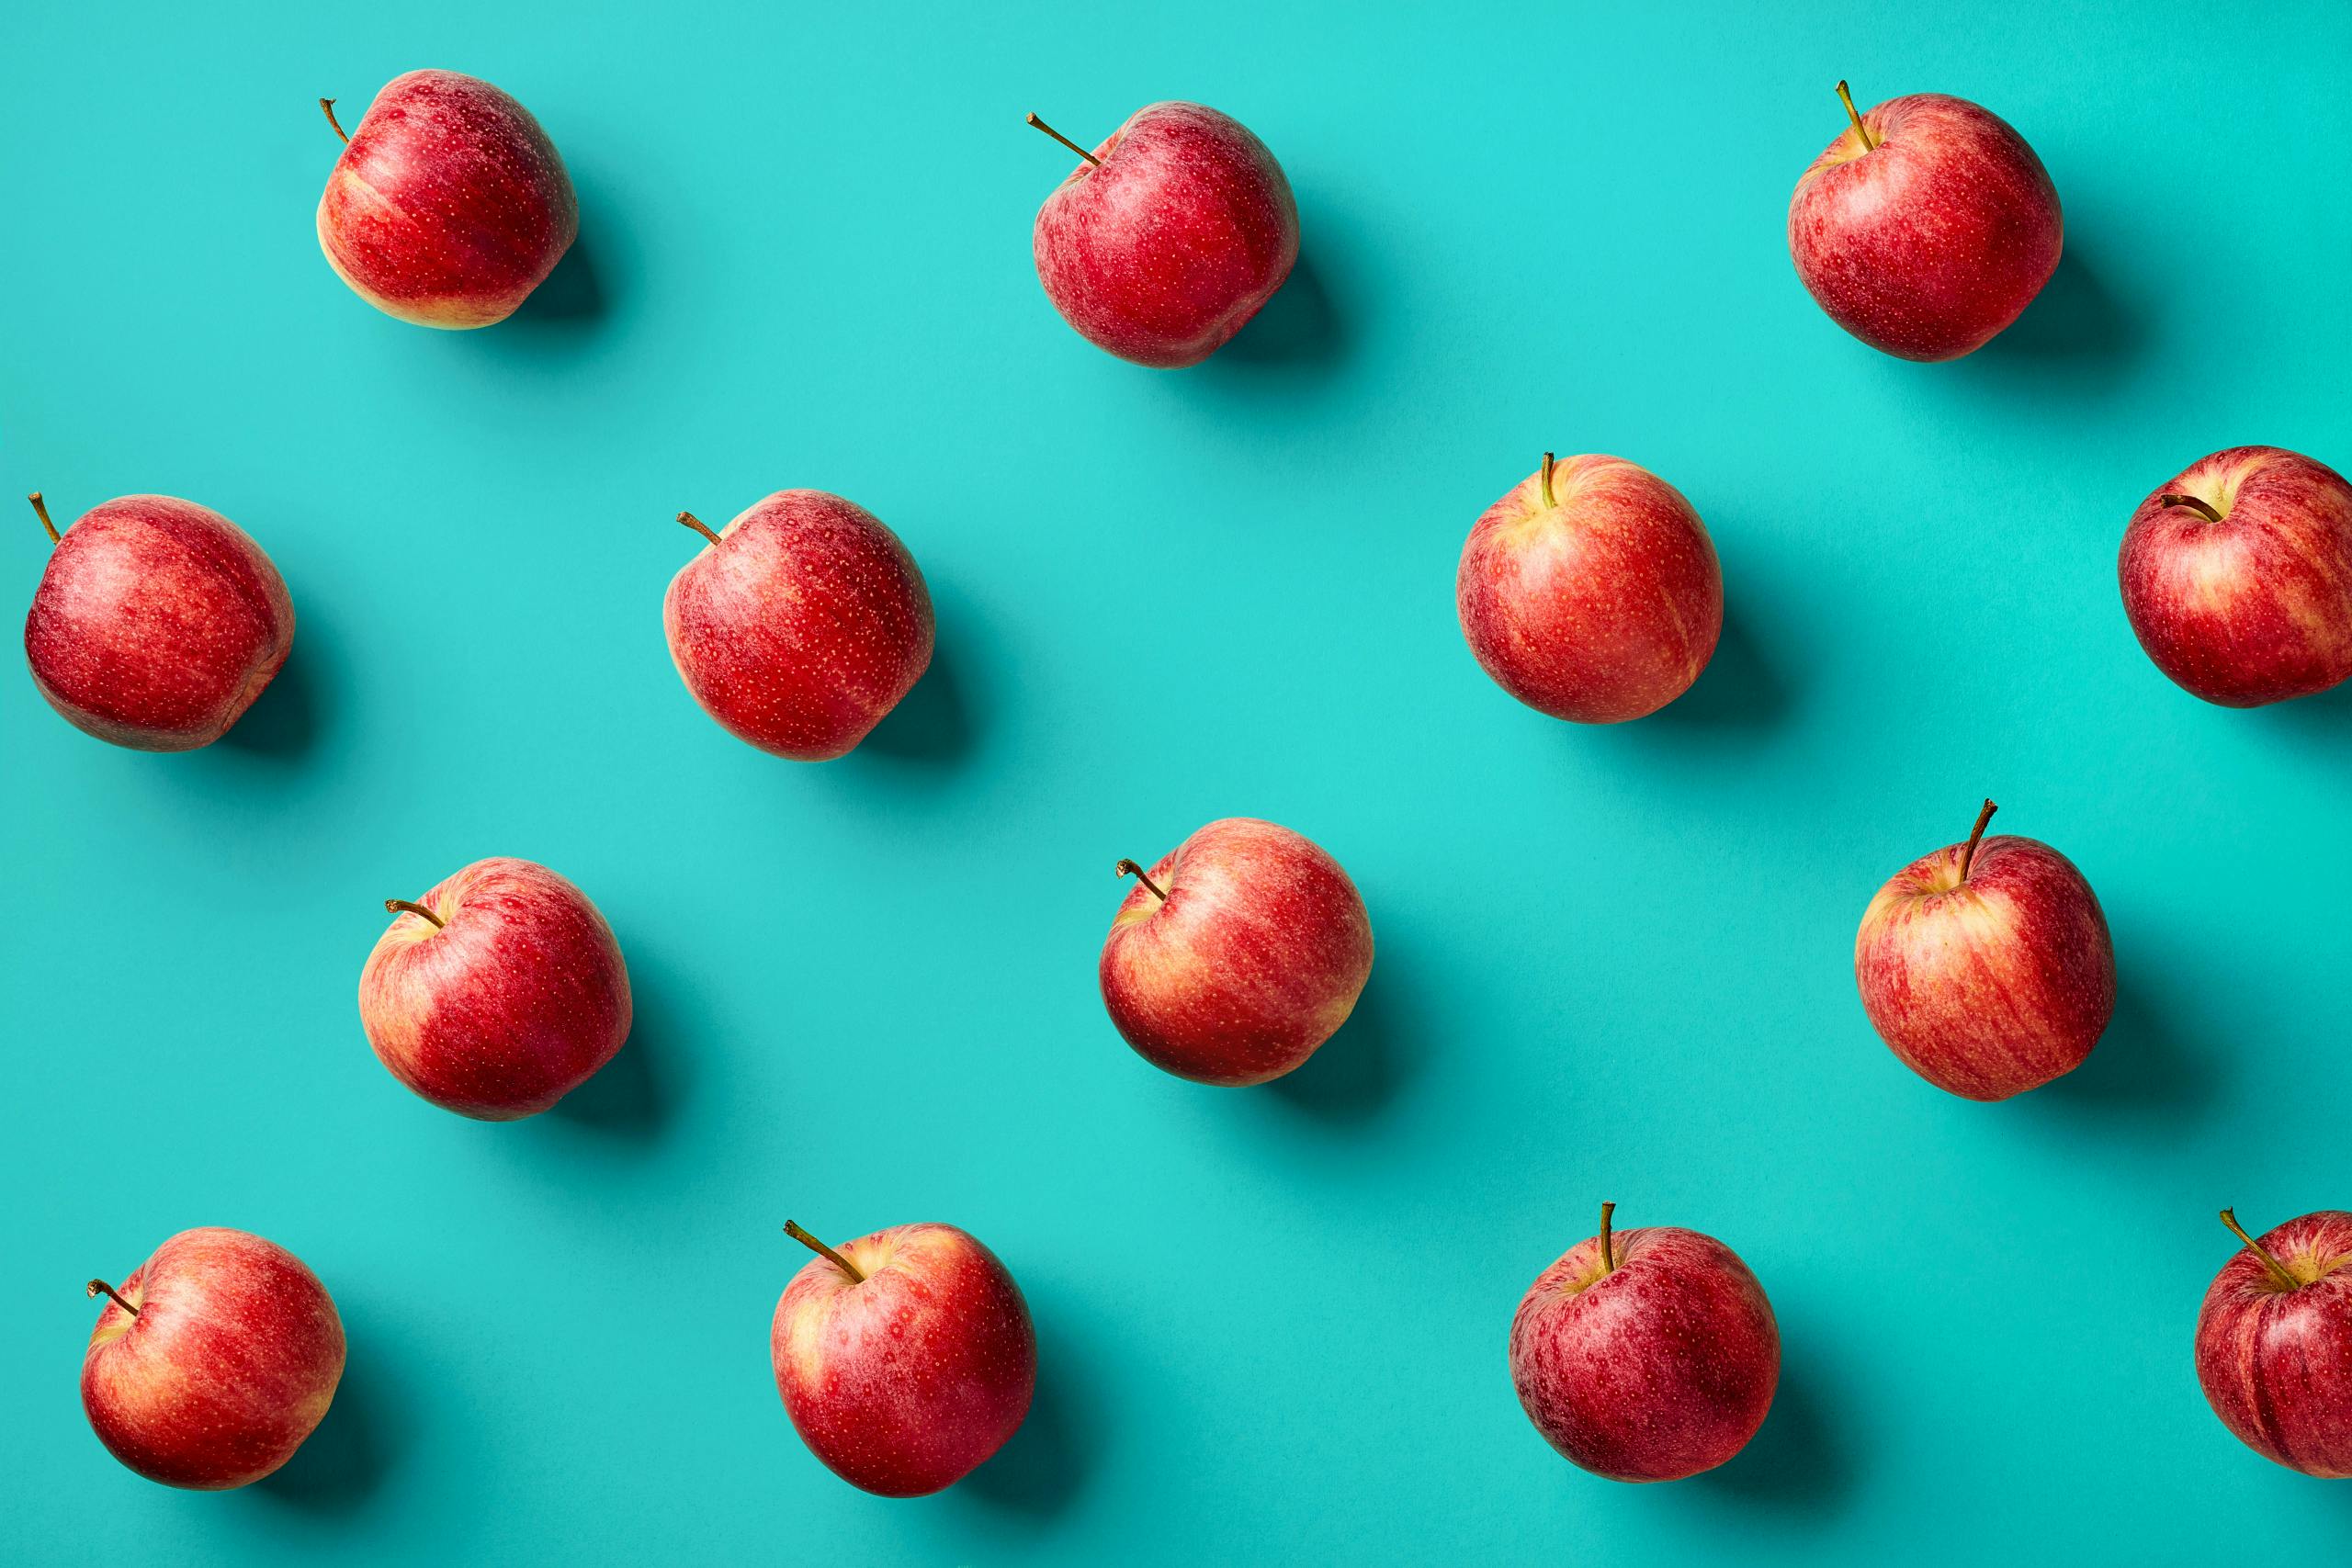 red apples in a diagonal grid pattern upon a turquoise background